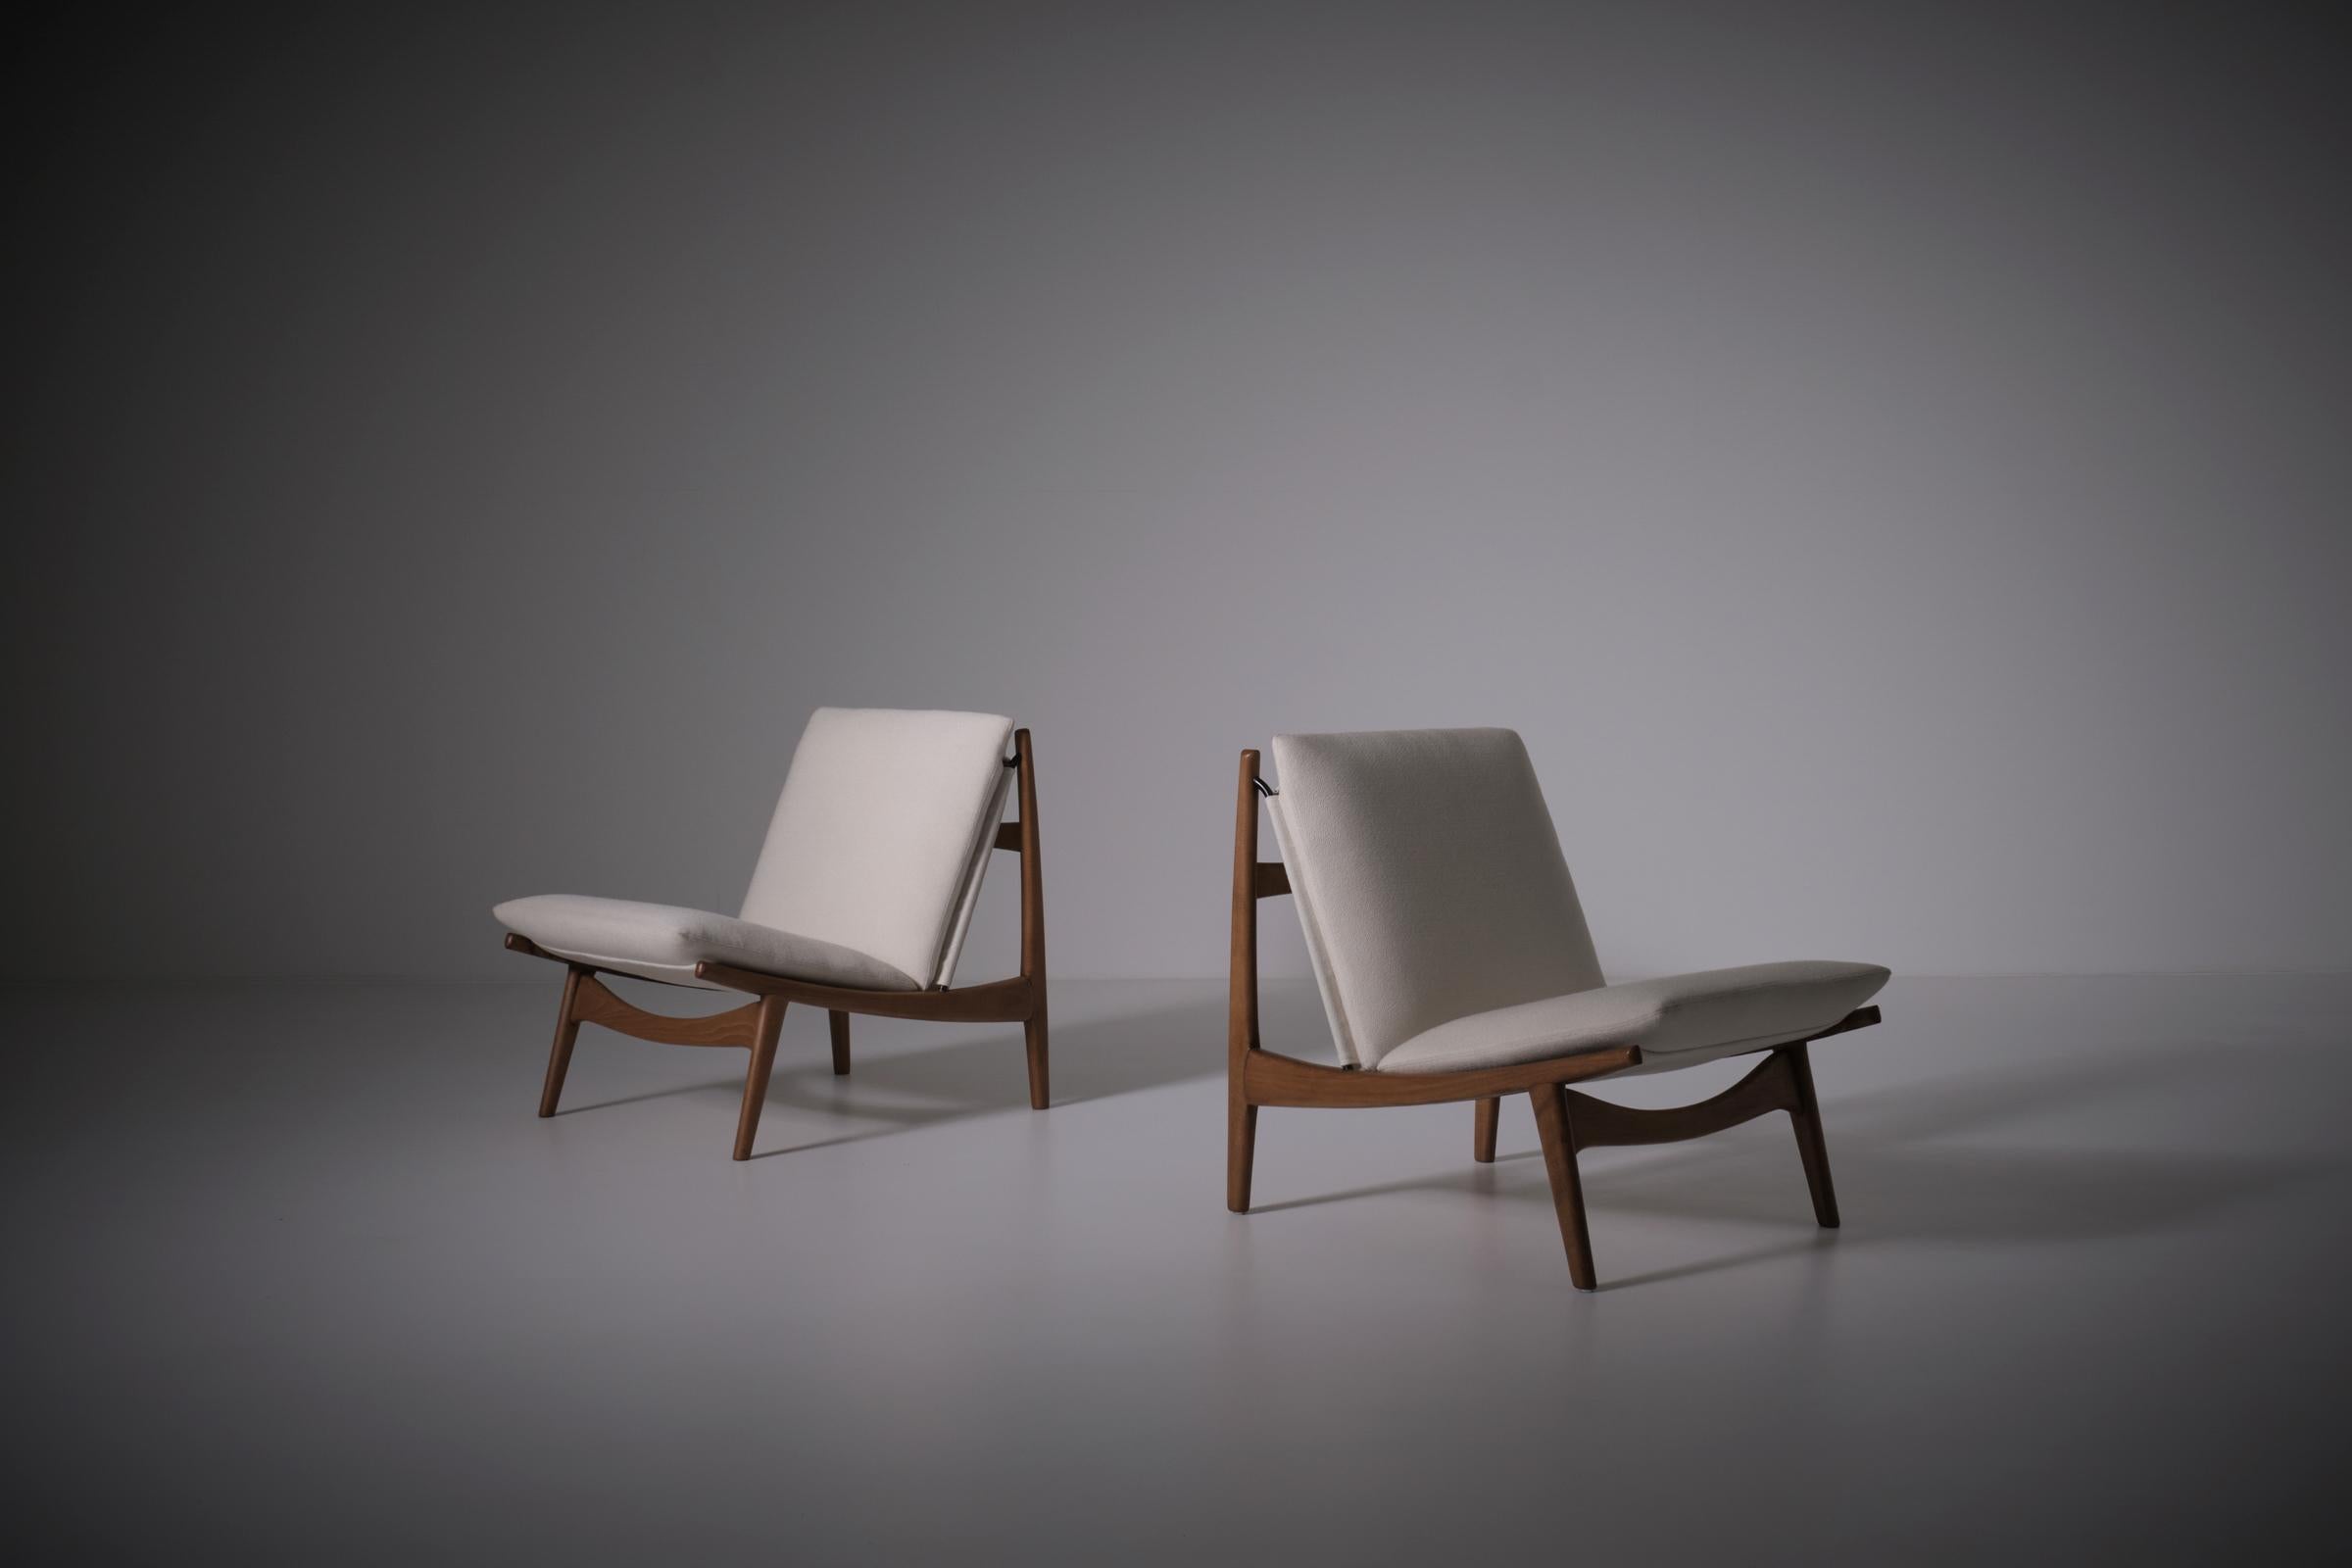 Rare pair of '790' easy chairs by Joseph-André Motte for Steiner, France 1963. The chairs have a remarkable sculptural shaped frame out of stained Ash. The frames are executed with a smart metal tubular support for both the strength and mounting of